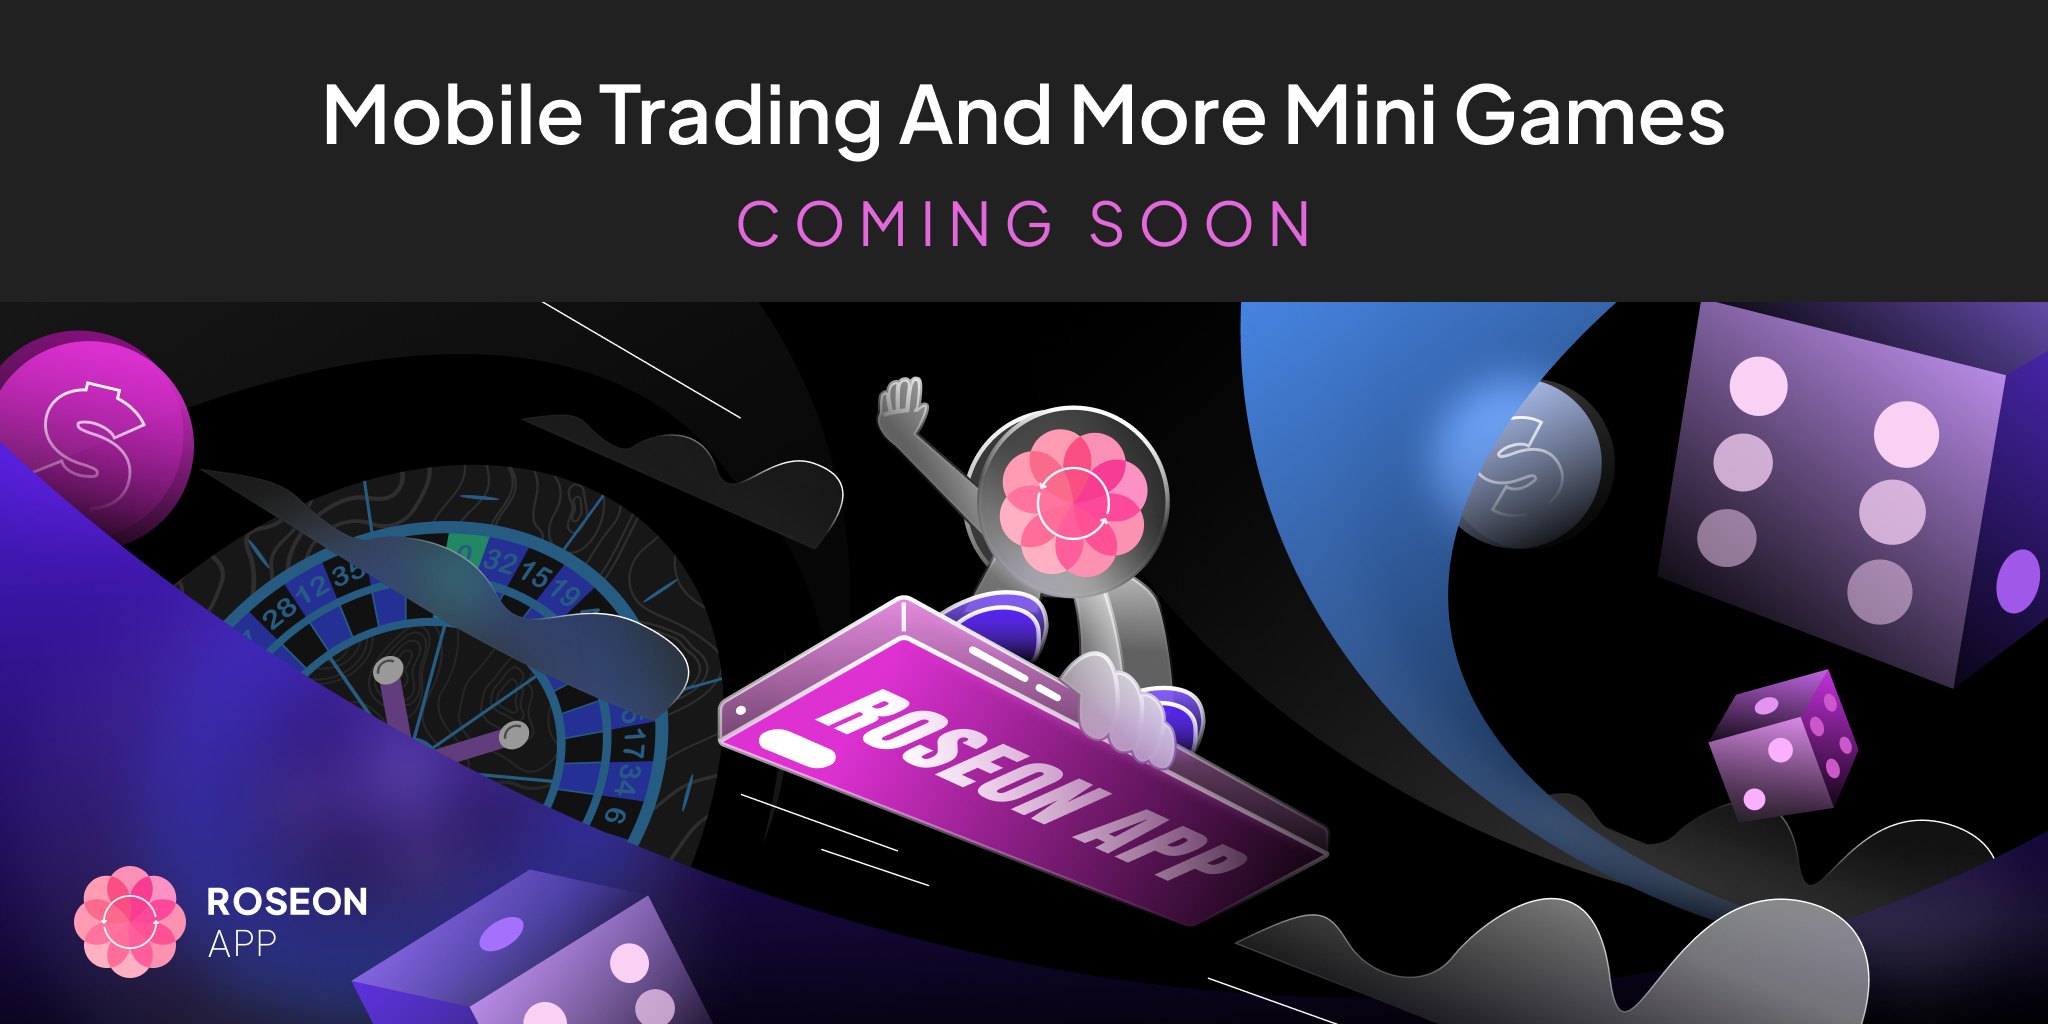 RoseonApp Adds Mobile Trading and Mini Games